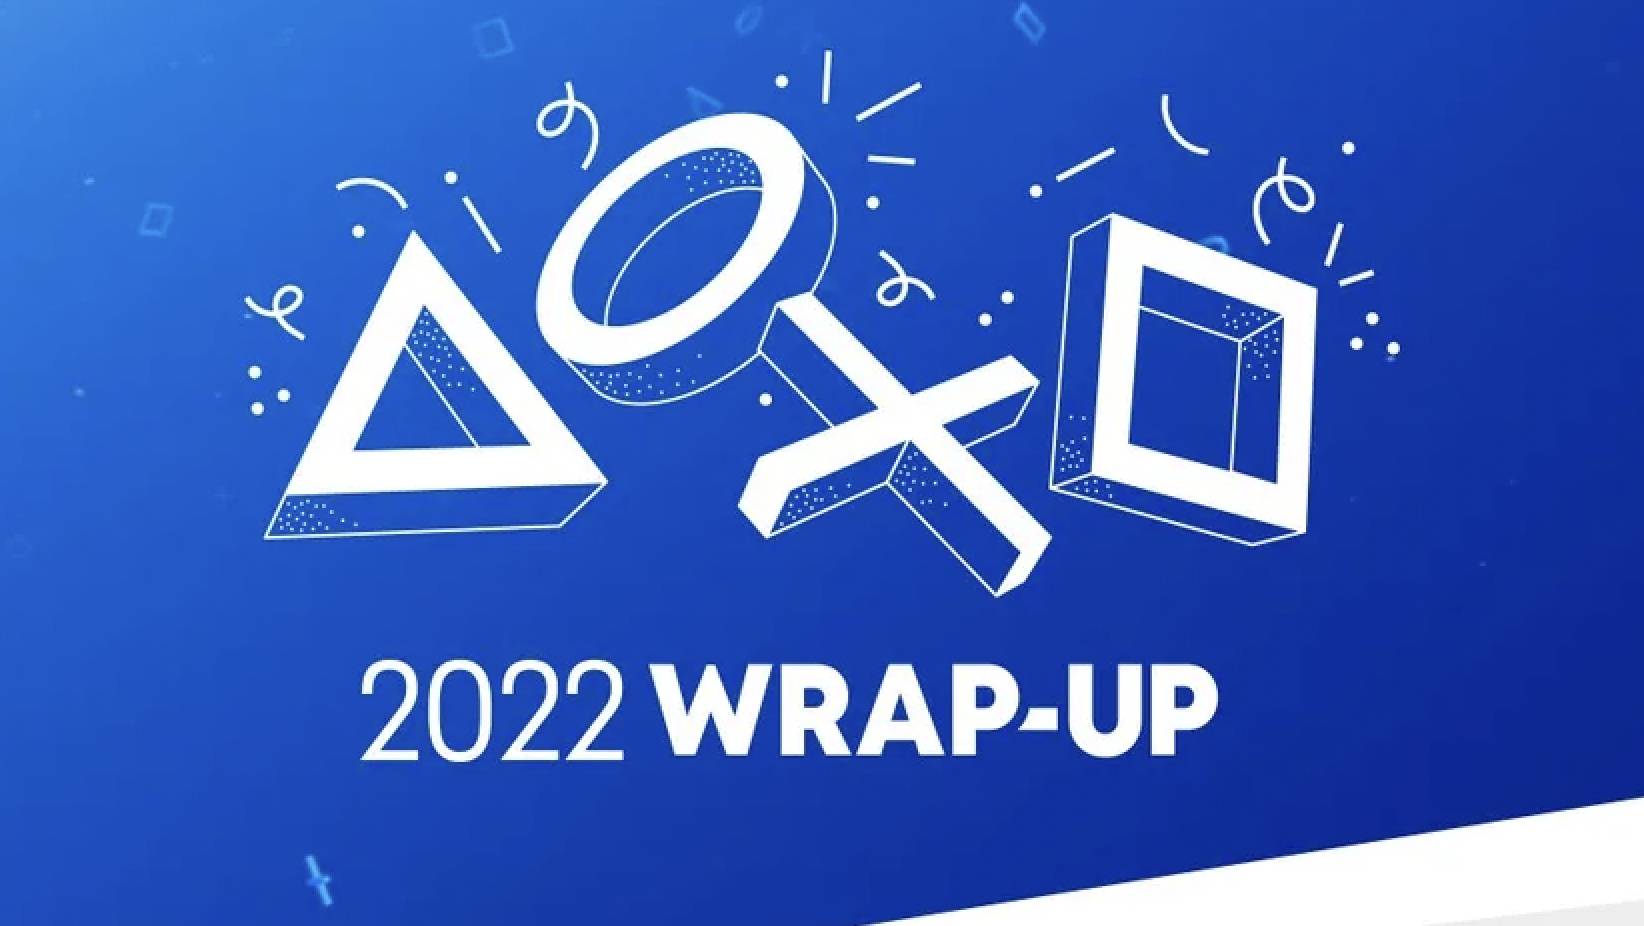 PlayStation 2022 WrapUp for PS4 and PS5 Games Appears Siliconera